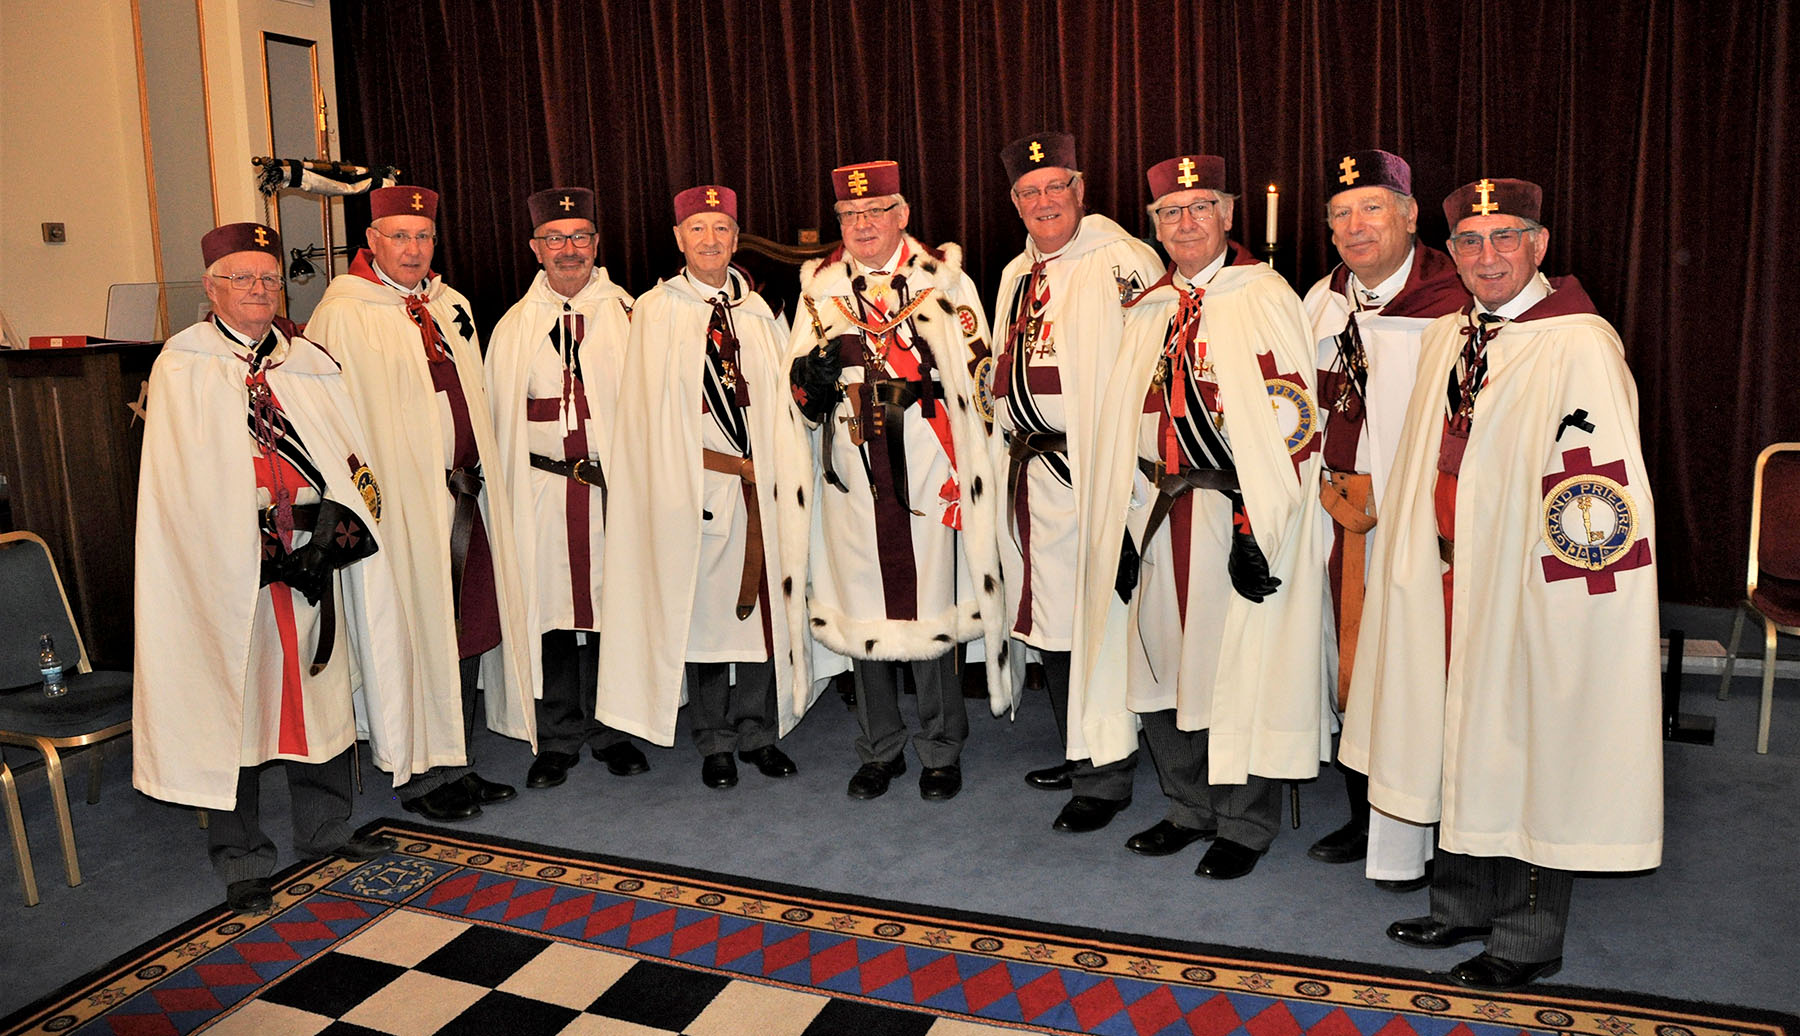 The Consecration of the Grand Master’s Bodyguard Preceptory